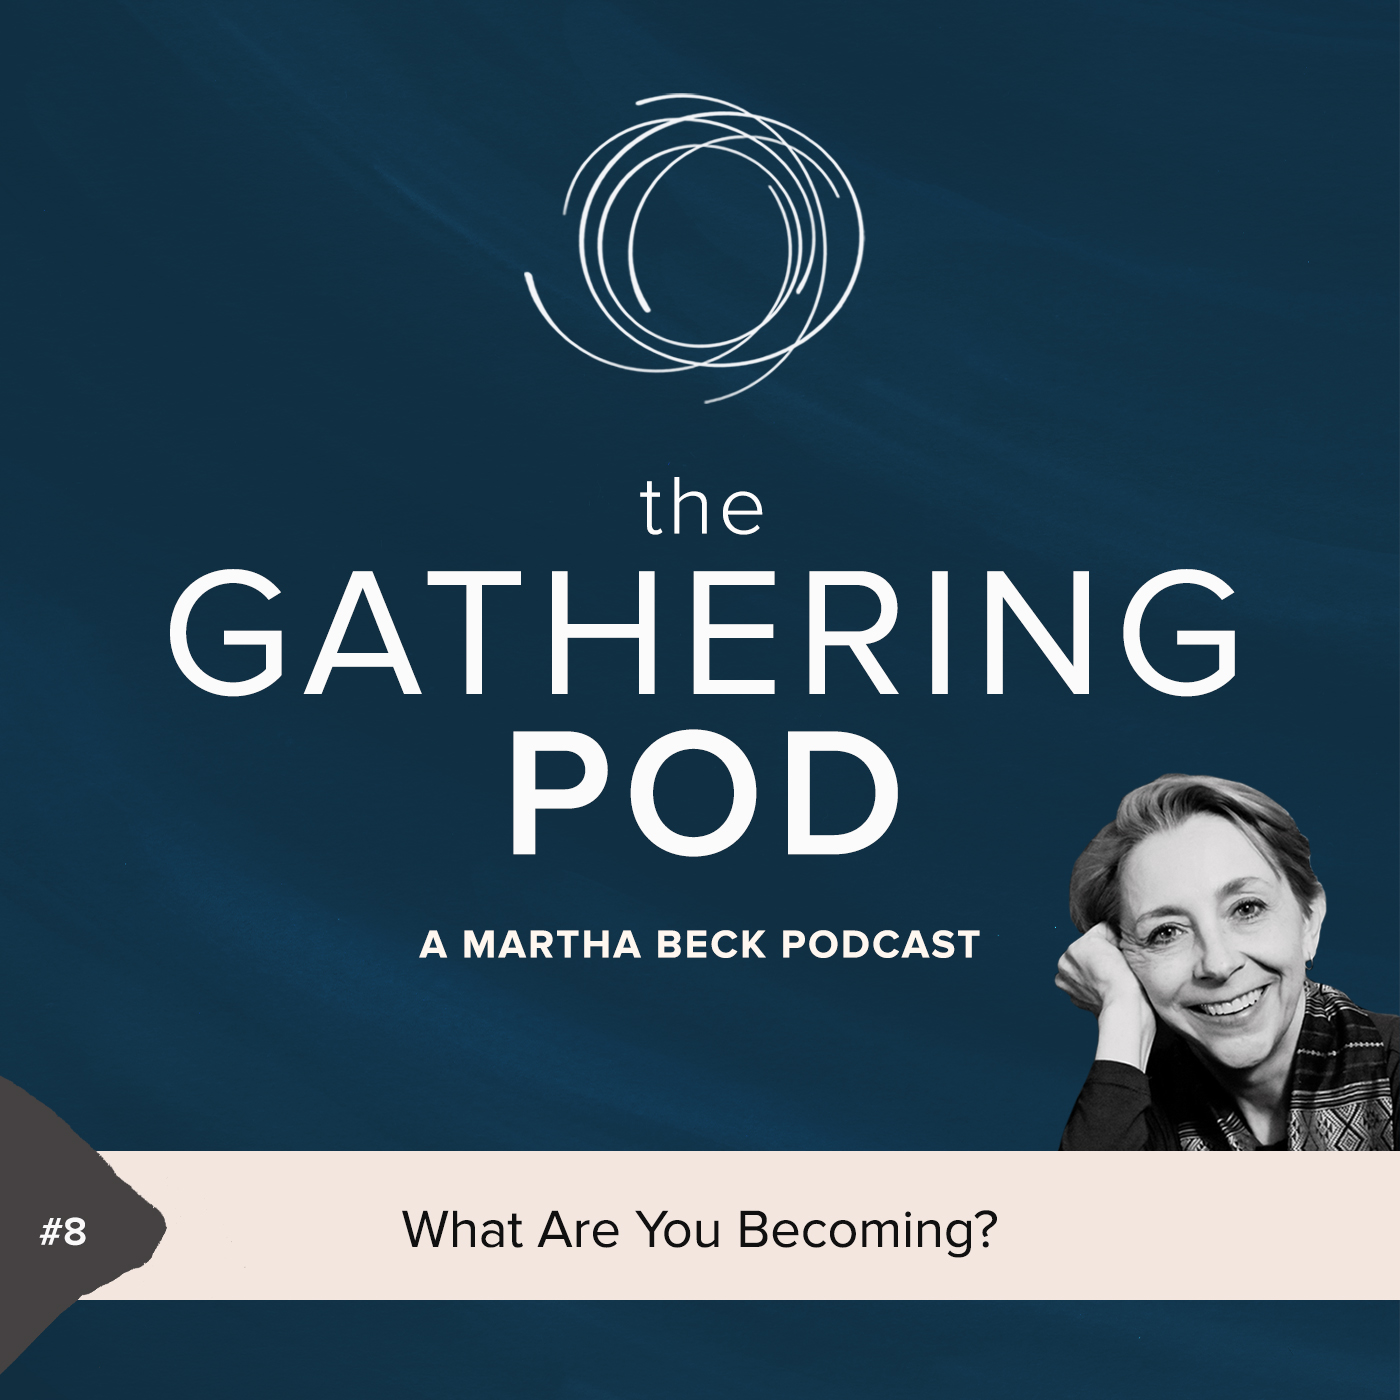 Image for The Gathering Pod A Martha Beck Podcast Episode #8 What Are You Becoming?